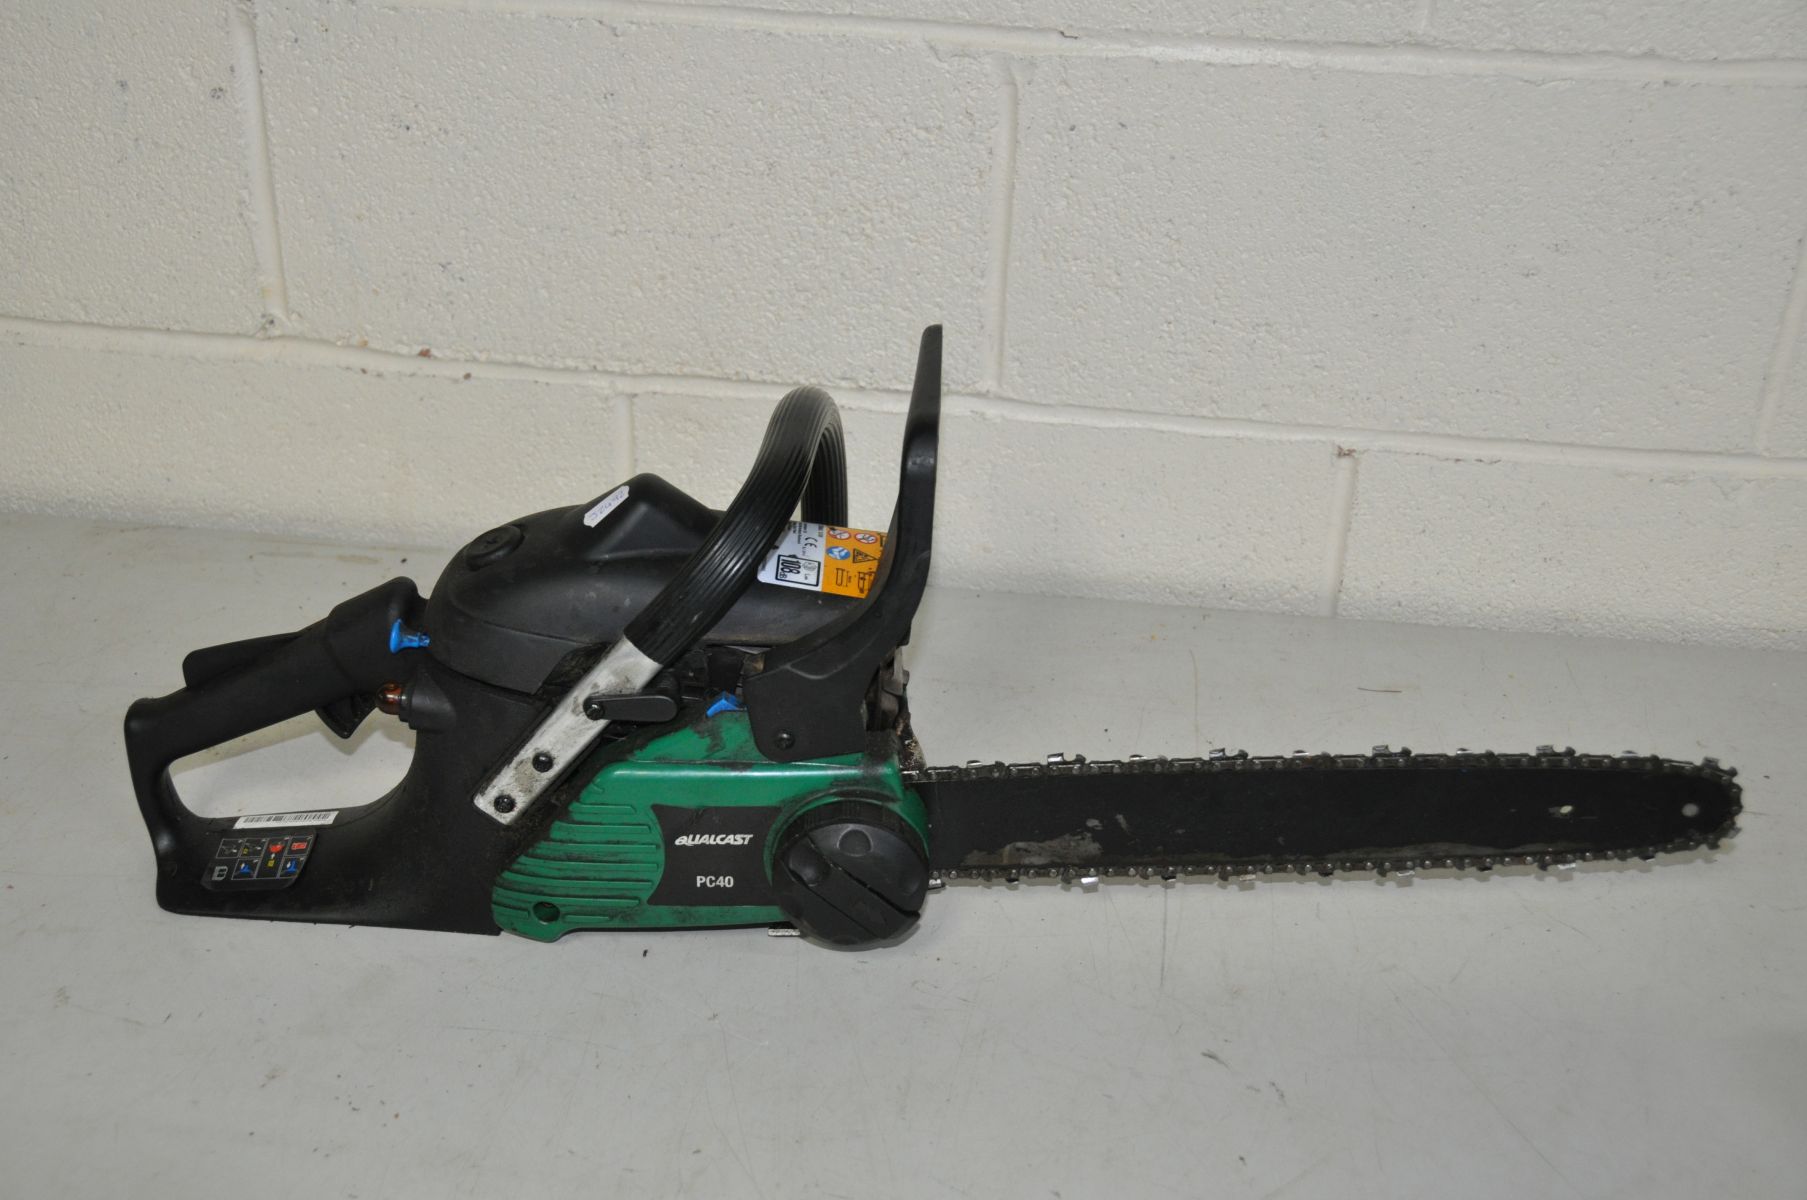 A QUALCAST PC40 PETROL CHAINSAW with 40cm cut ( engine pulls freely but hasn't been started)